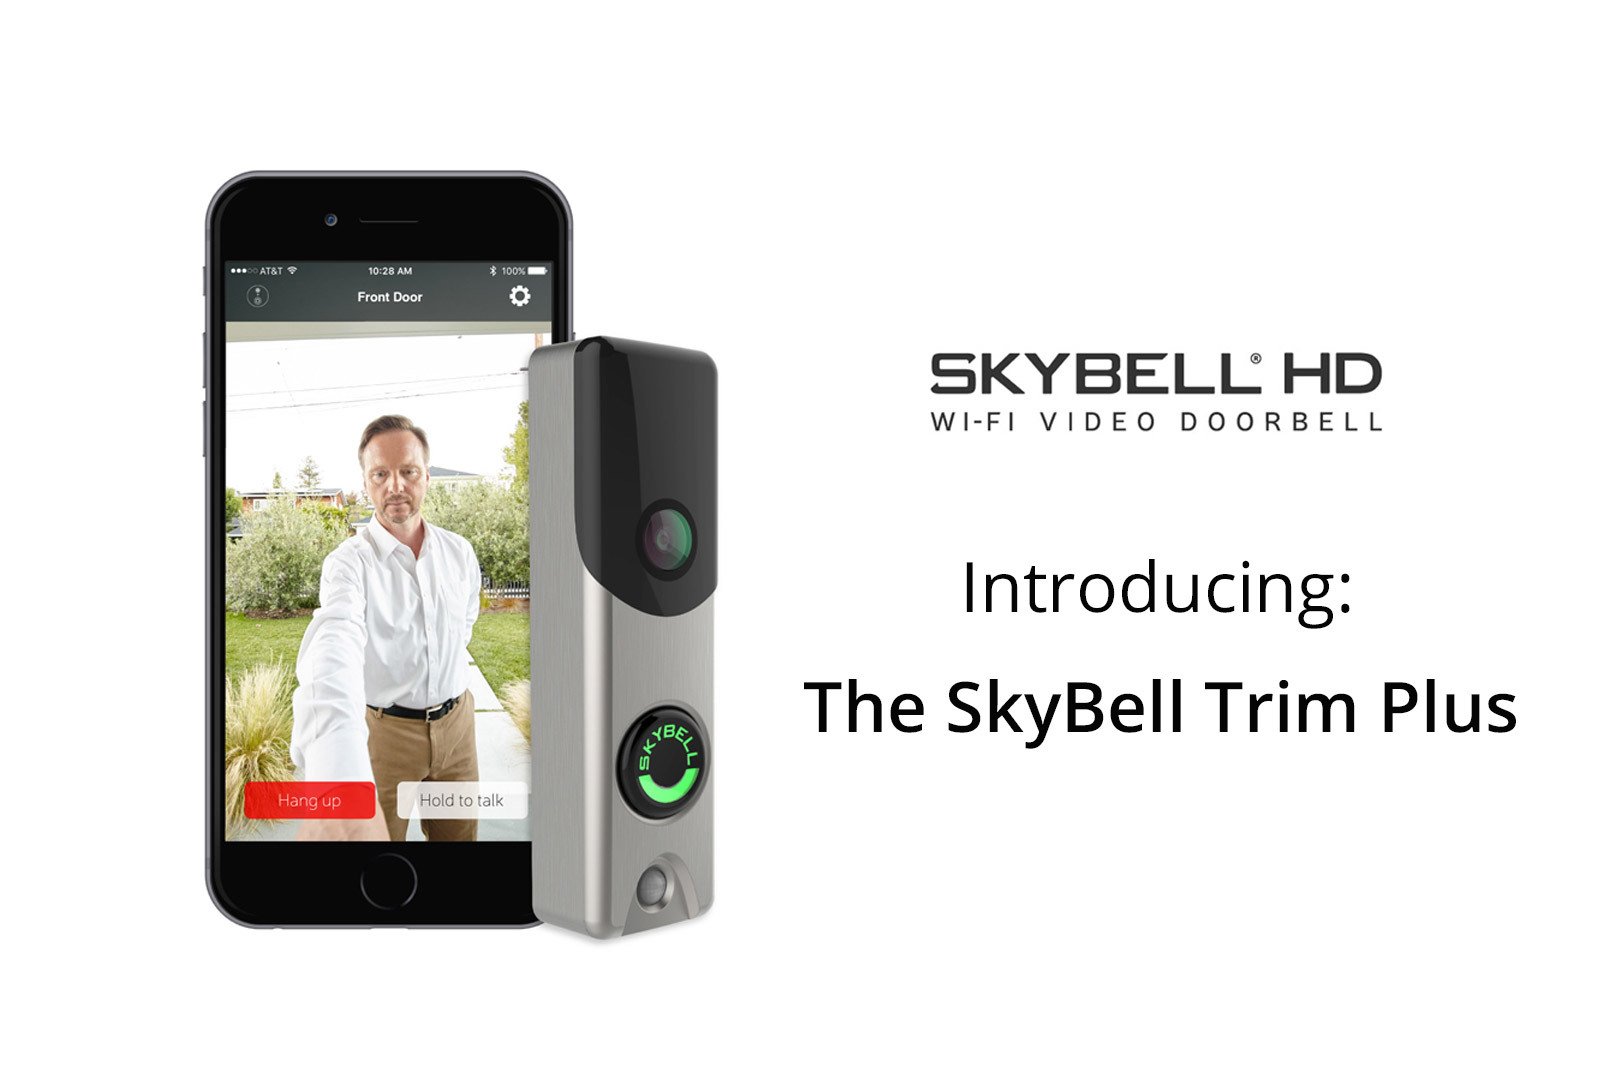 SkyBell Doorbell on Twitter: "Meet the SkyBell Trim Plus. video doorbell that works on every home https://t.co/72S09WUCfn #CEDIA #CEDIA16 @CEDIA / Twitter